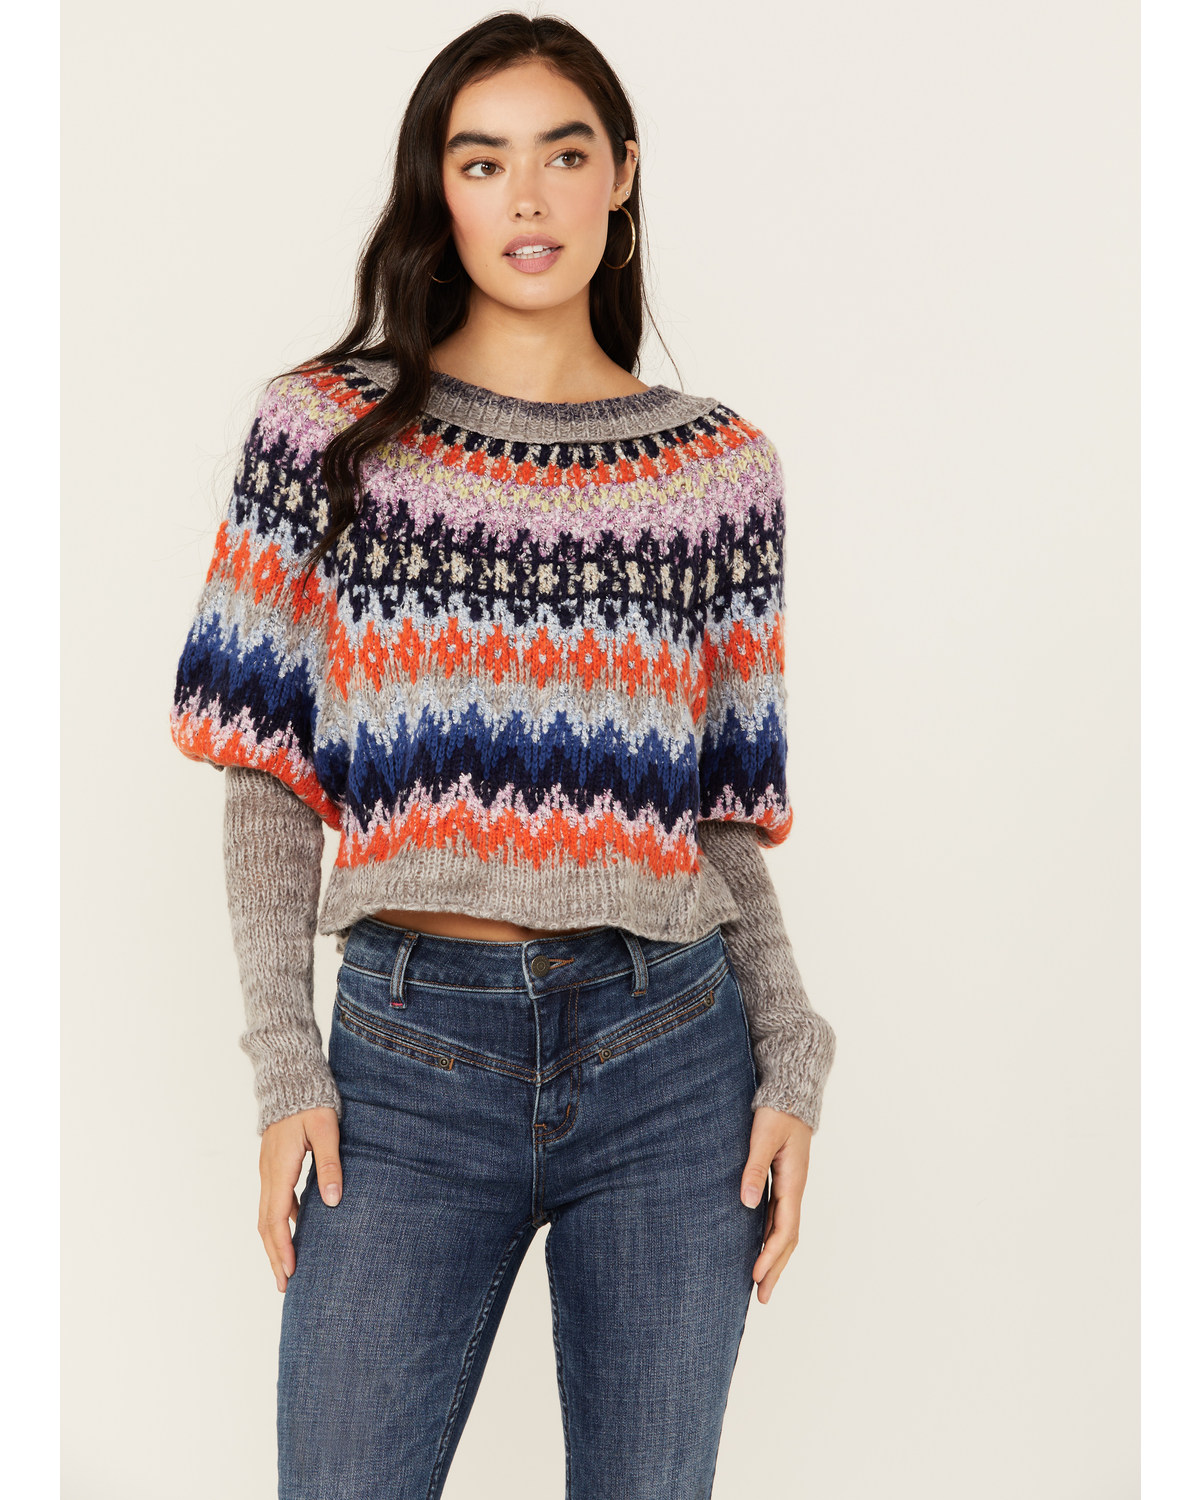 Free People Women's Home For The Holidays Sweater